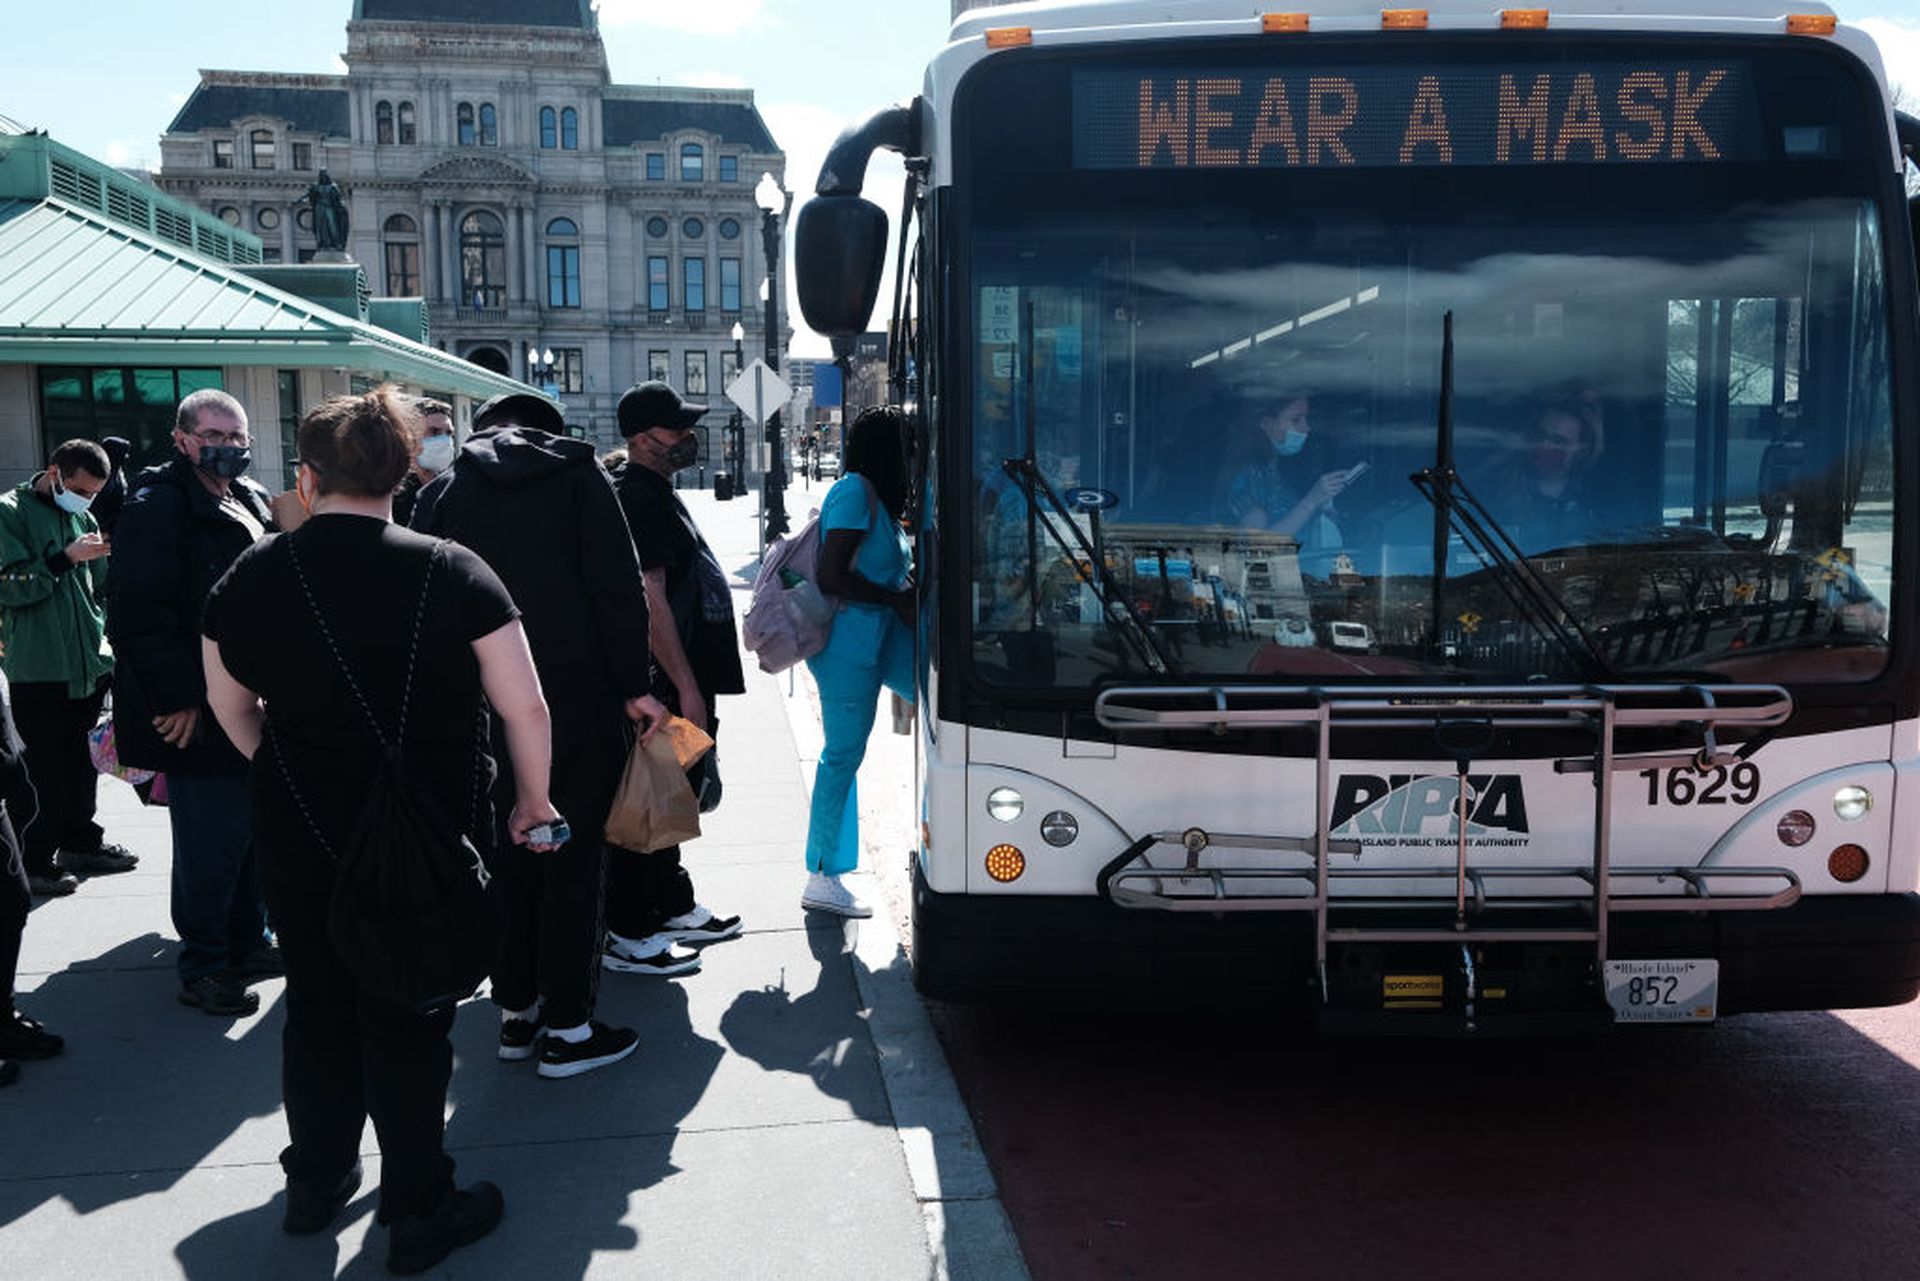 People board a bus at a stop on April 8, 2021, in Providence, R.I. An ongoing investigation into the public transit authority reveals new details, including that its former health plan administrator has been added to the review. (Photo by Spencer Platt/Getty Images)